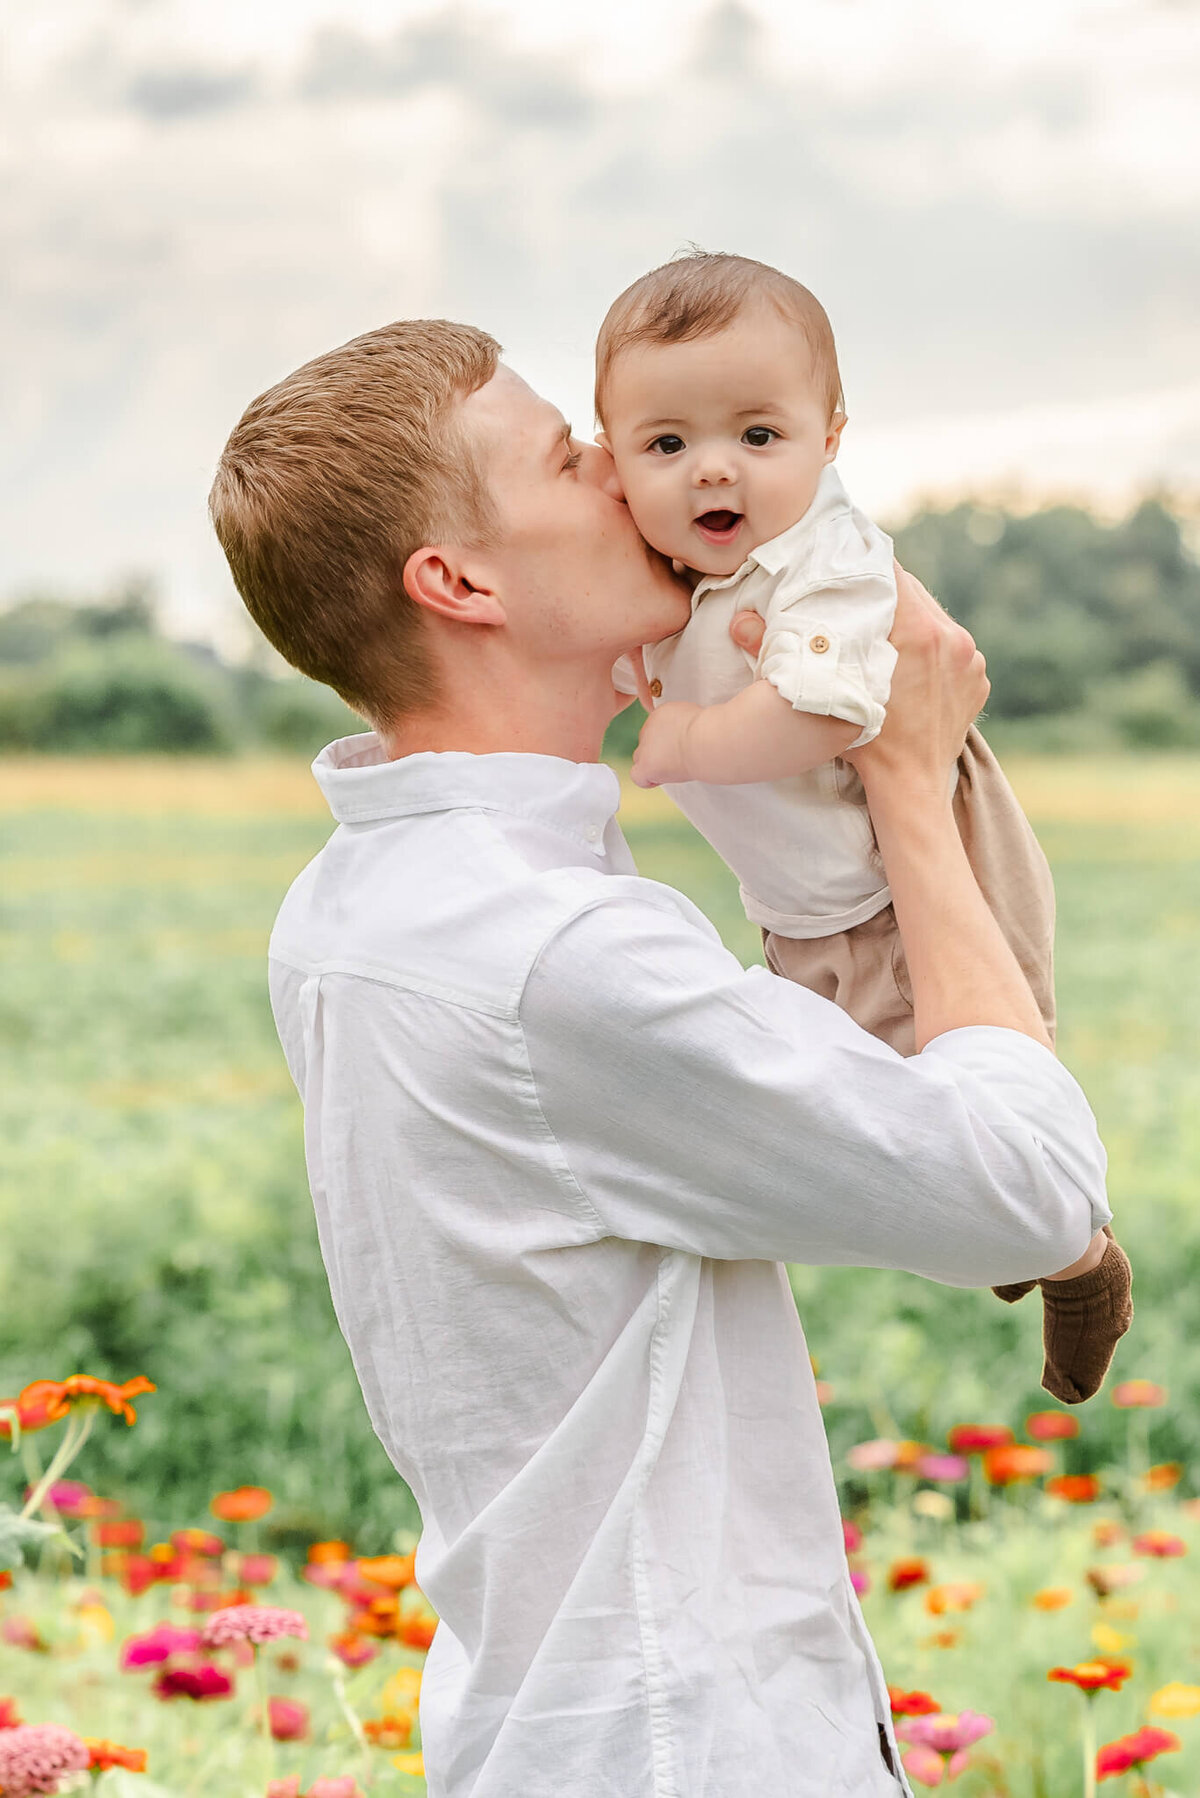 A man wearing a white shirt holds up his infant son and gives him a kiss on the cheek. Image by Justine Renee Photography in Chesapeake, Virginia.